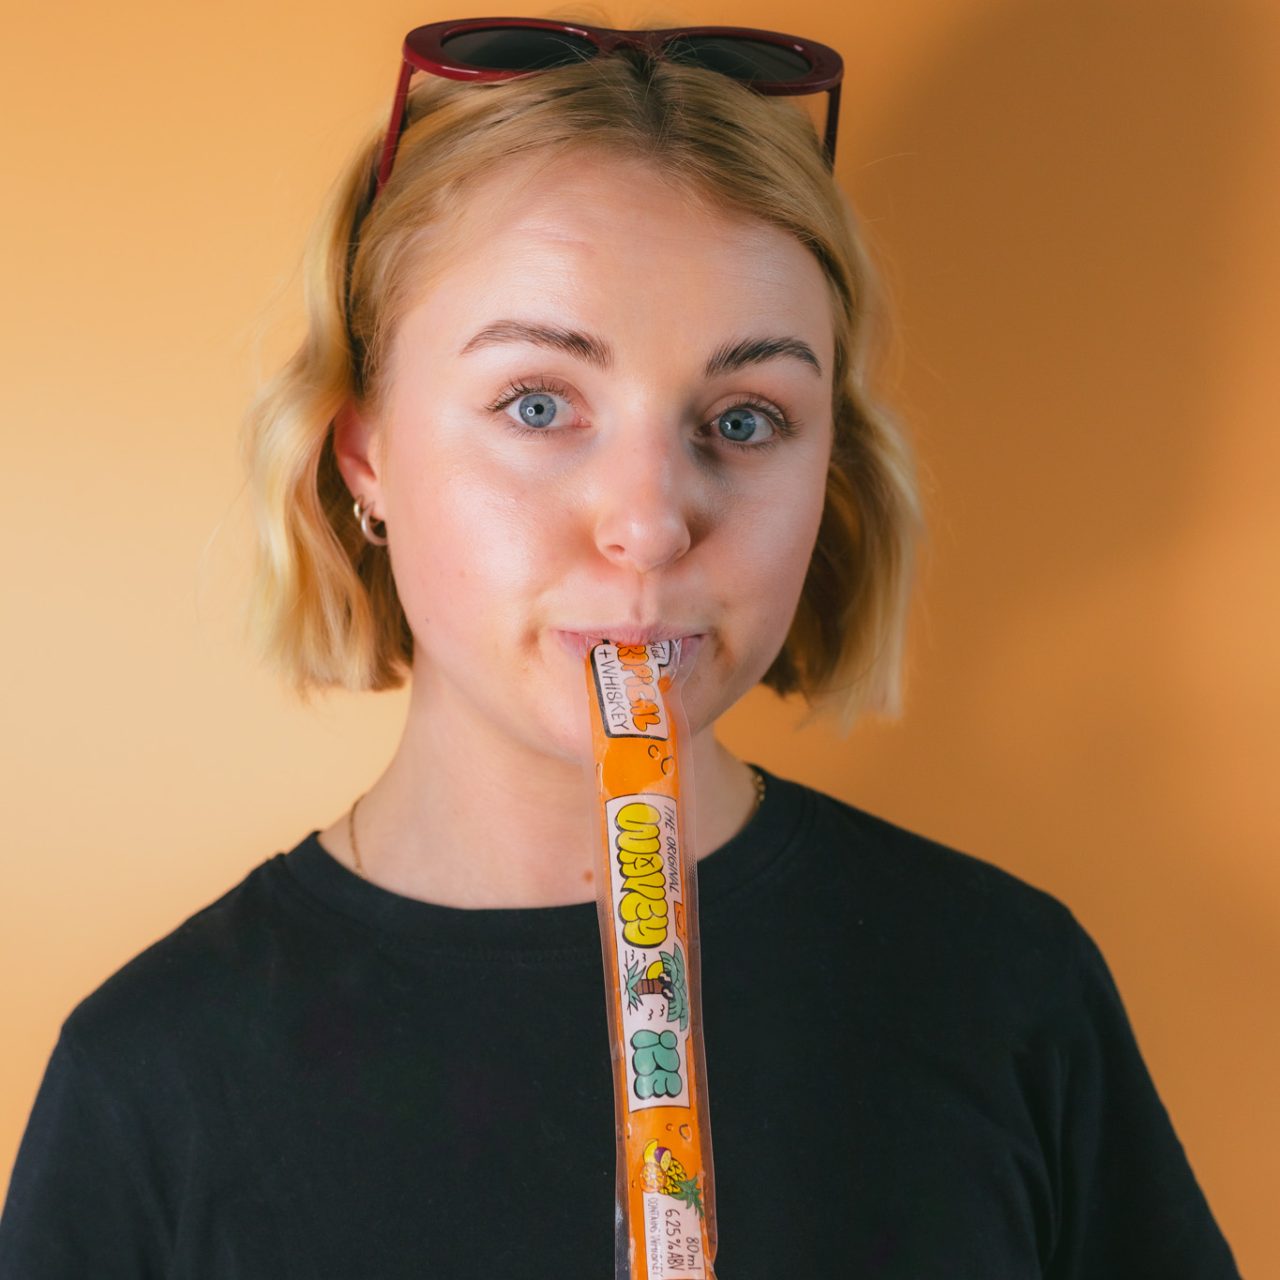 Alcoholic ice pop brand aims to ‘break whiskey stereotype’